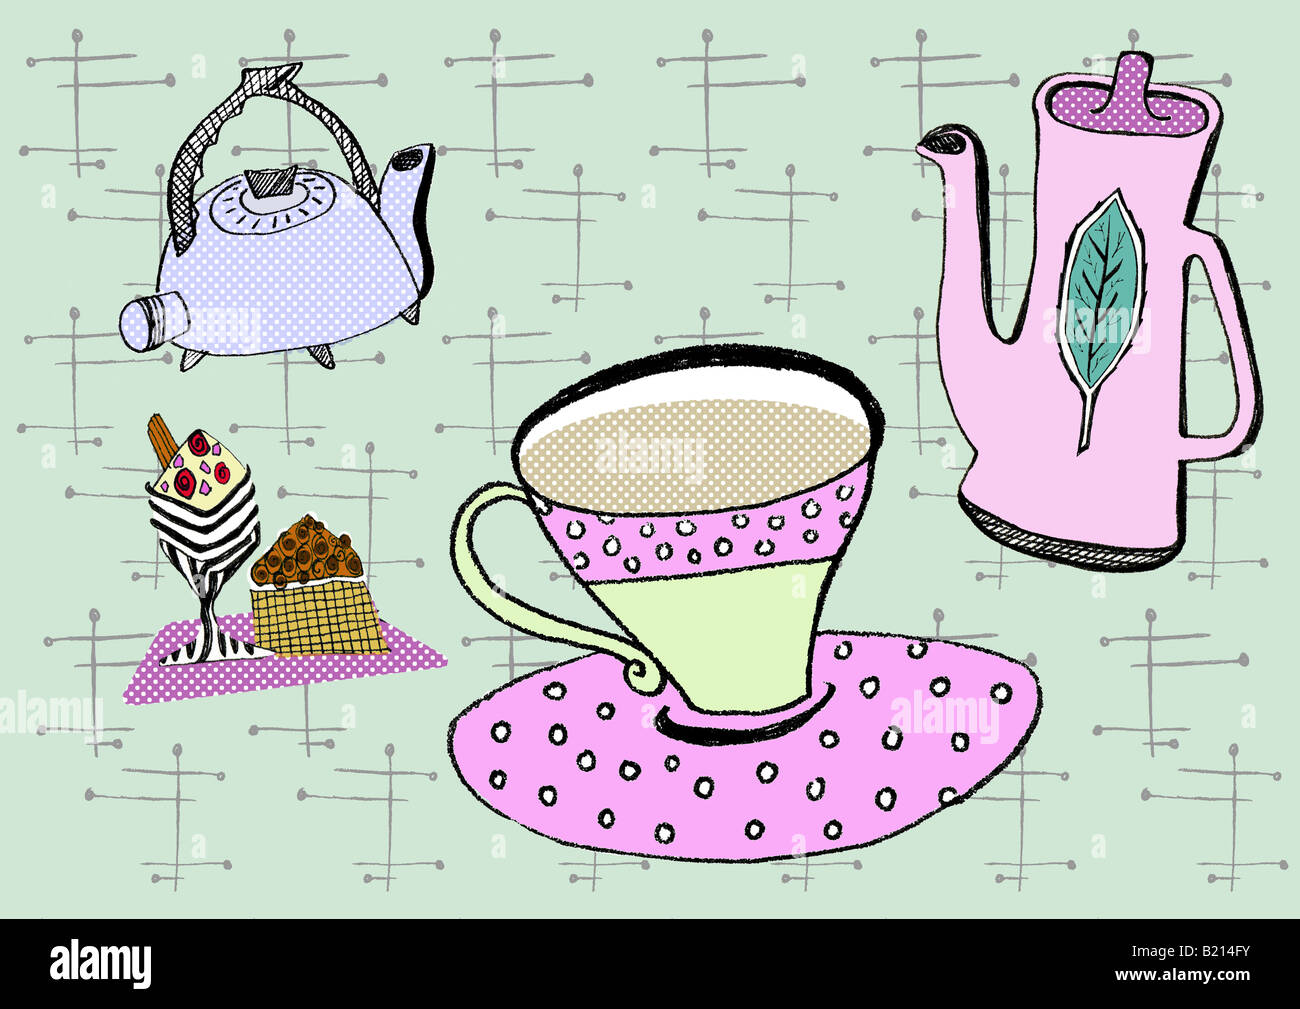 1950's style illustration of coffee pots, tea pots, cup and saucer and cakes. Stock Photo